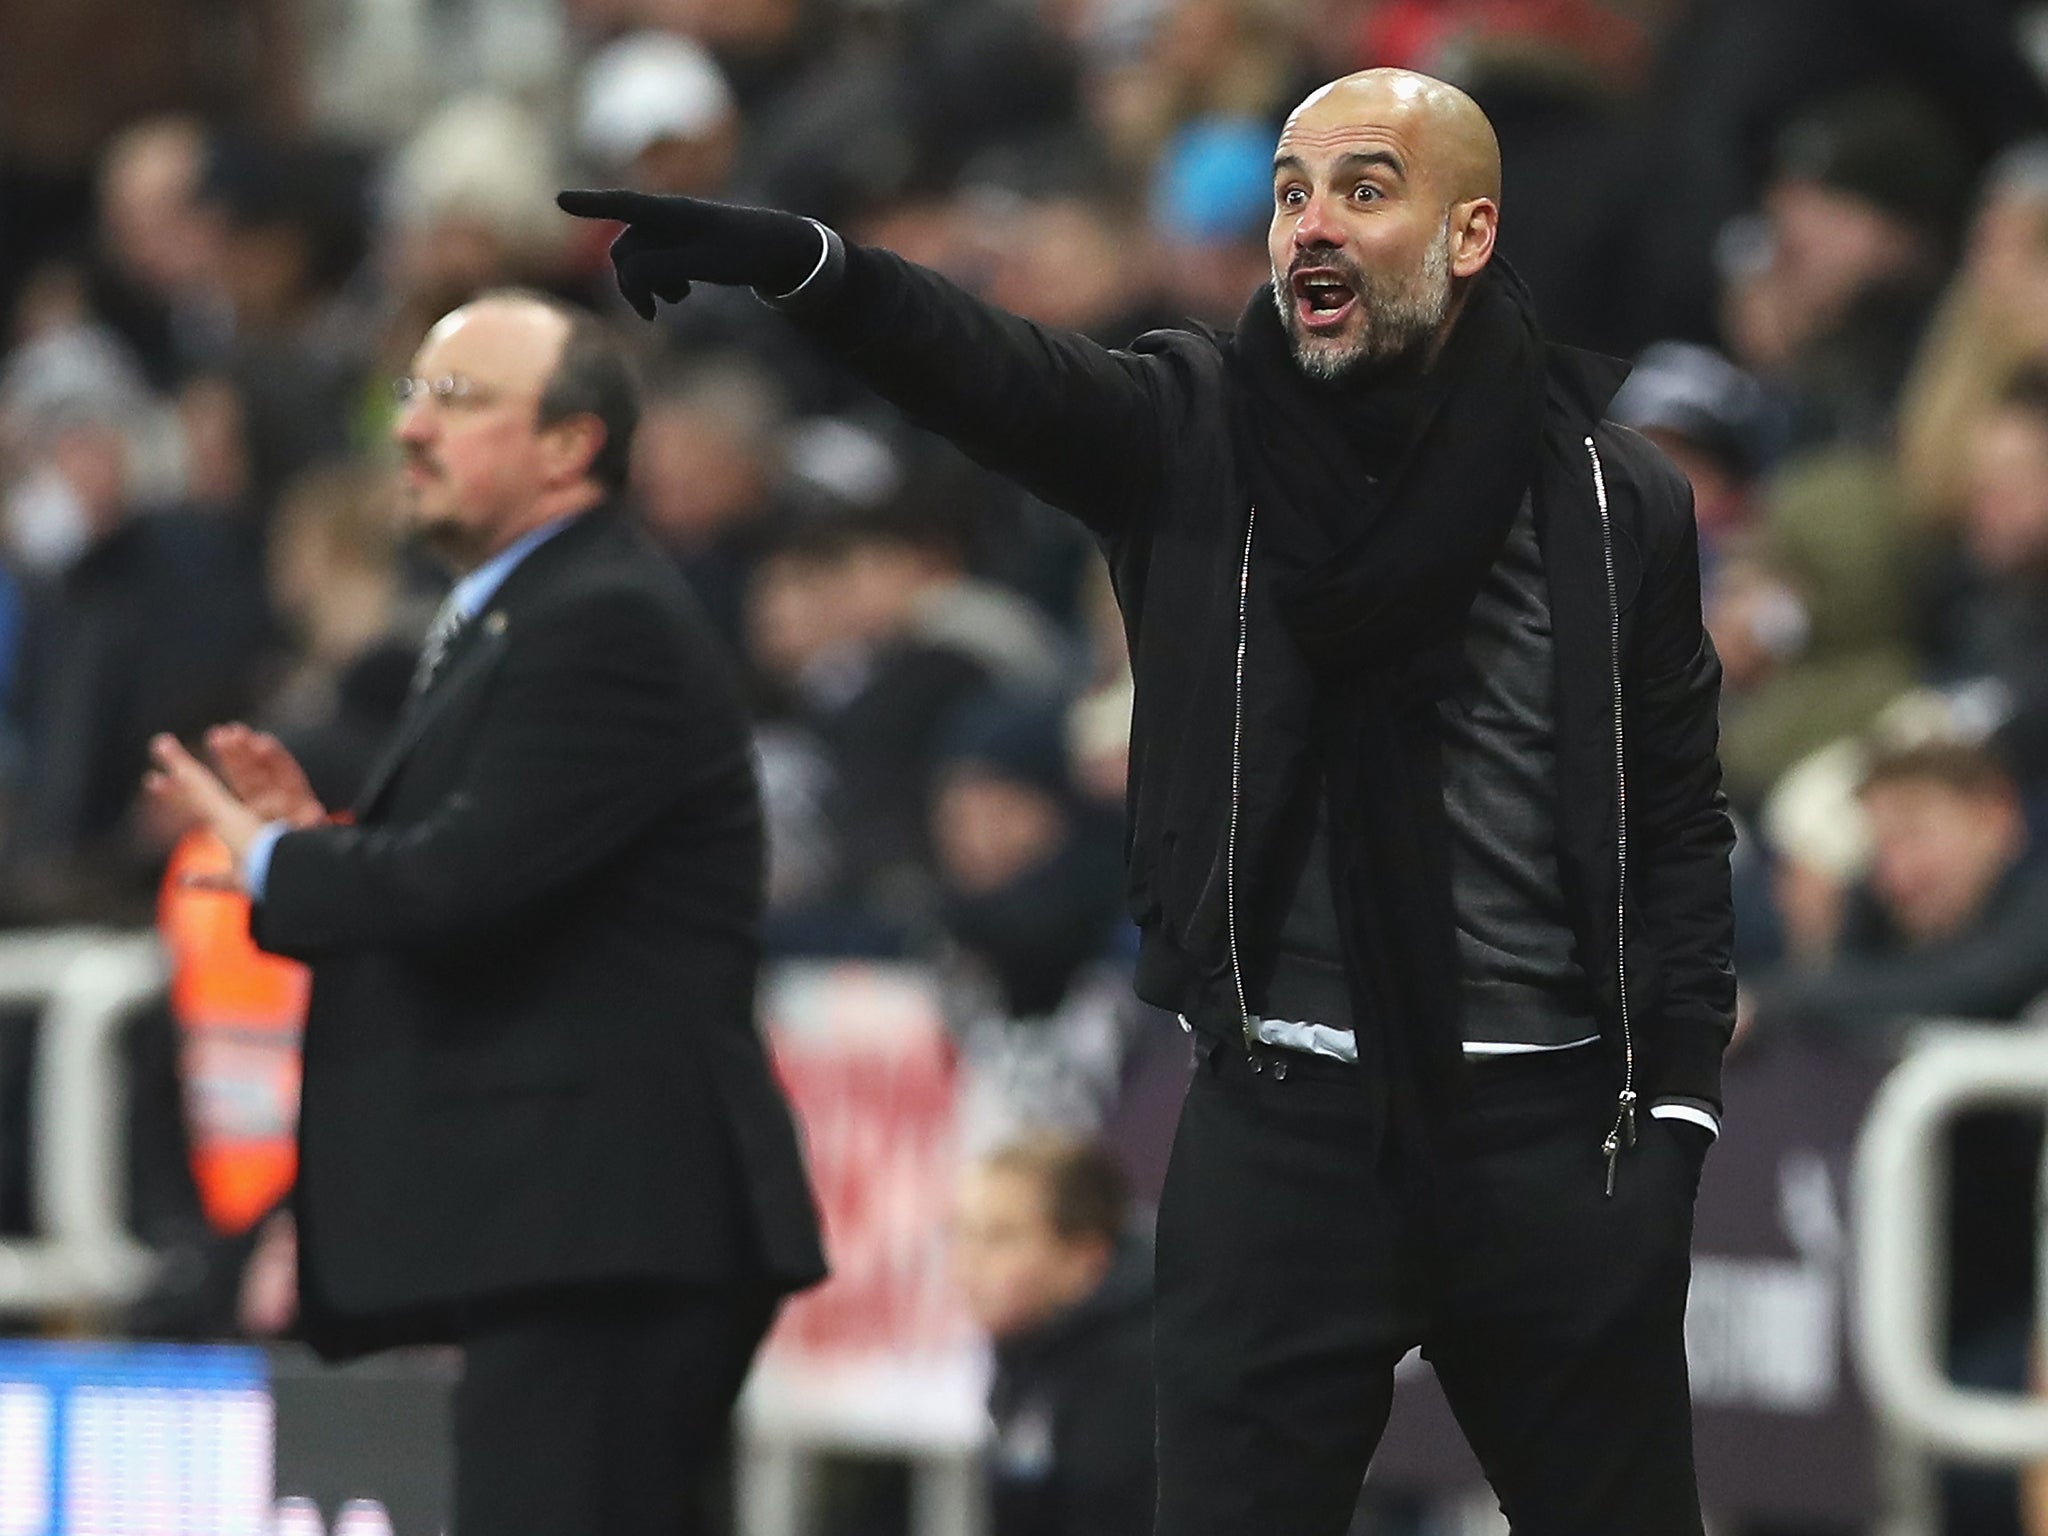 Guardiola believes the fixture pile-up in the Premier League is unacceptable